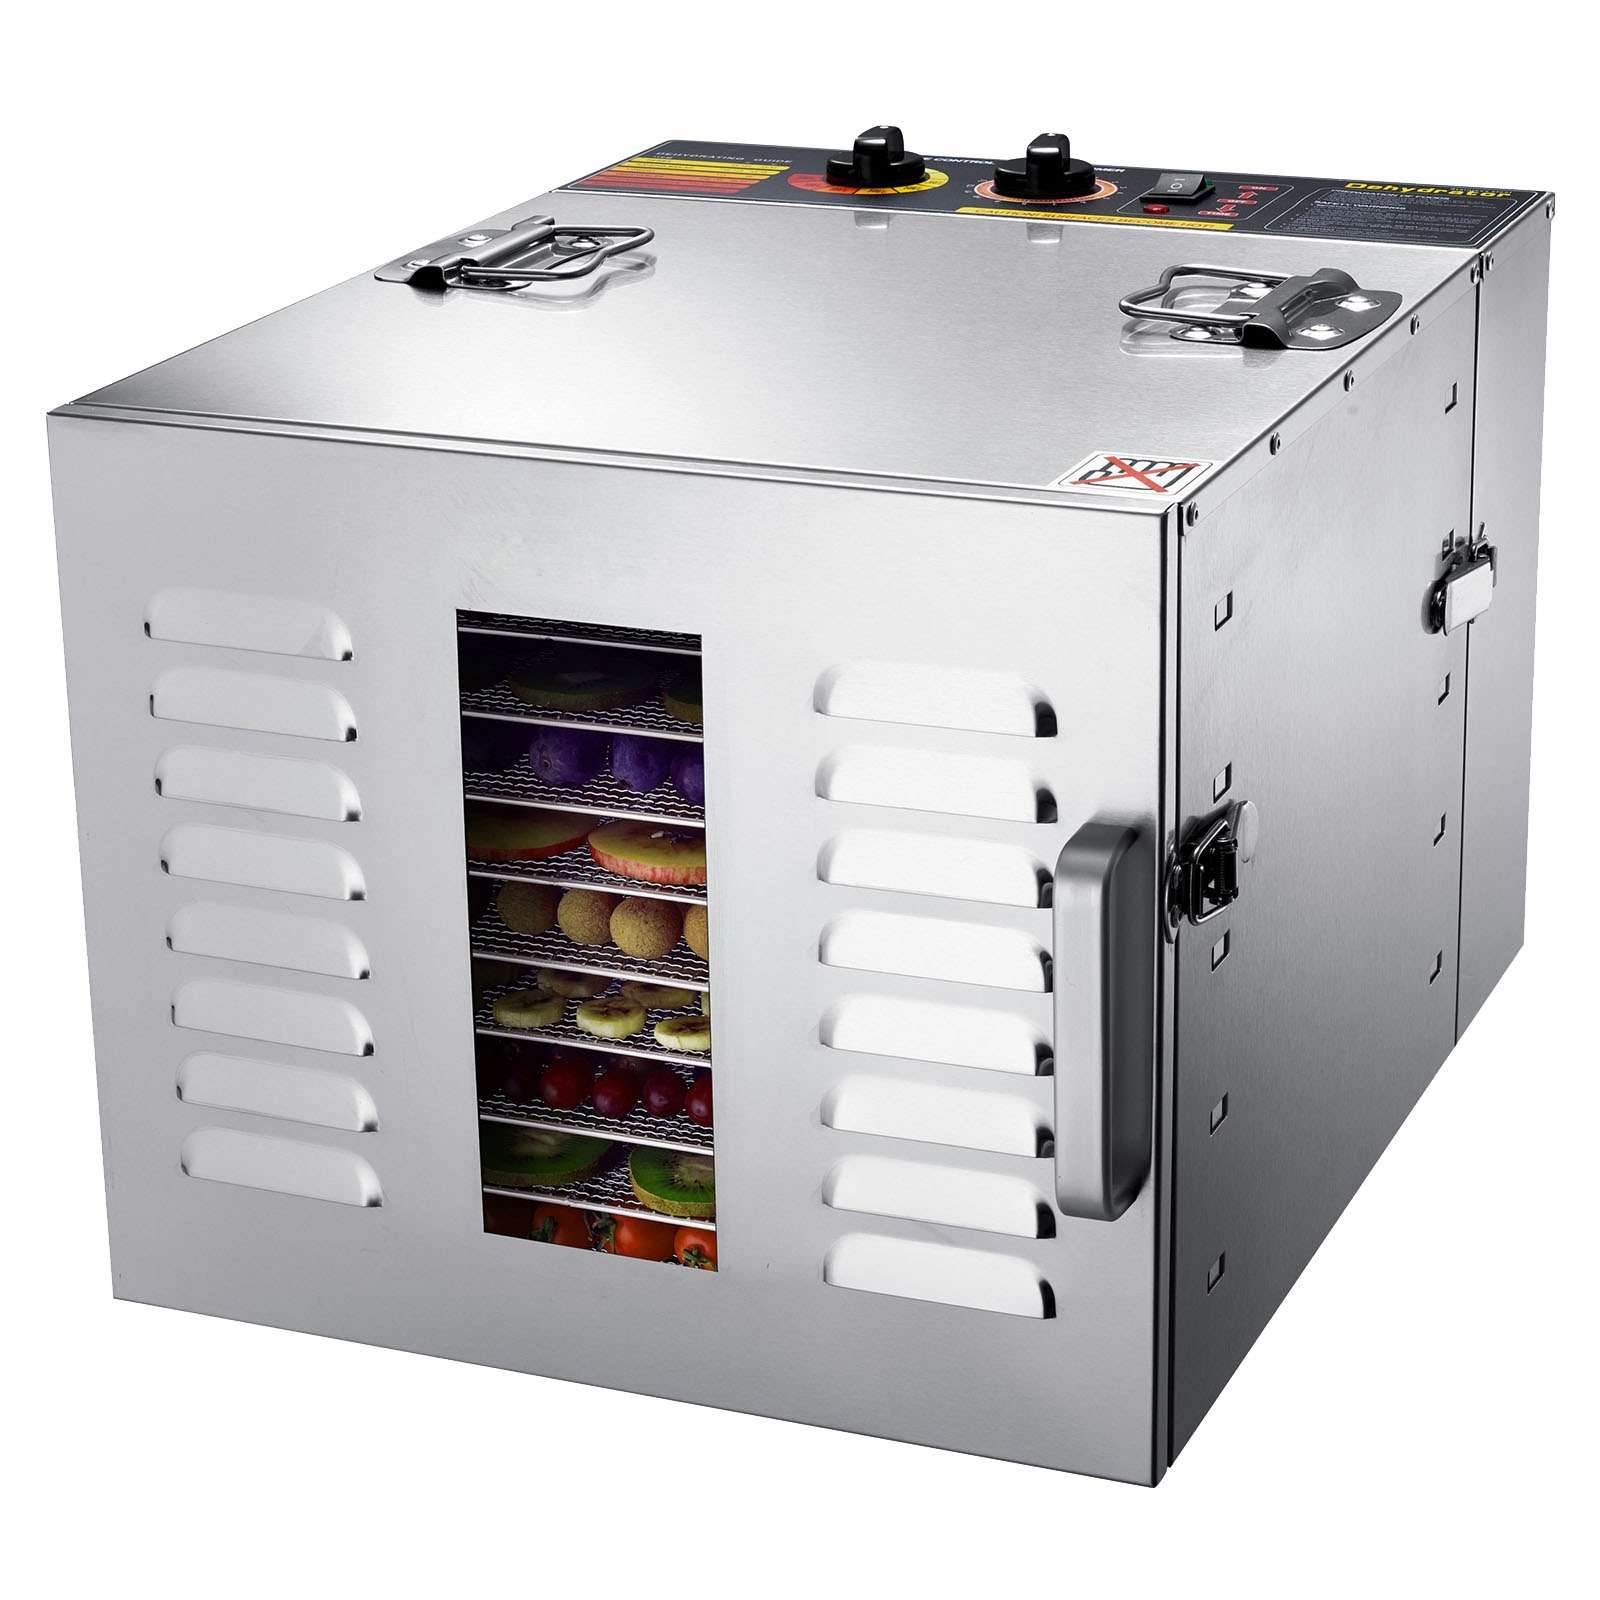 Premium 10 Tray Commercial Food Dehydrator